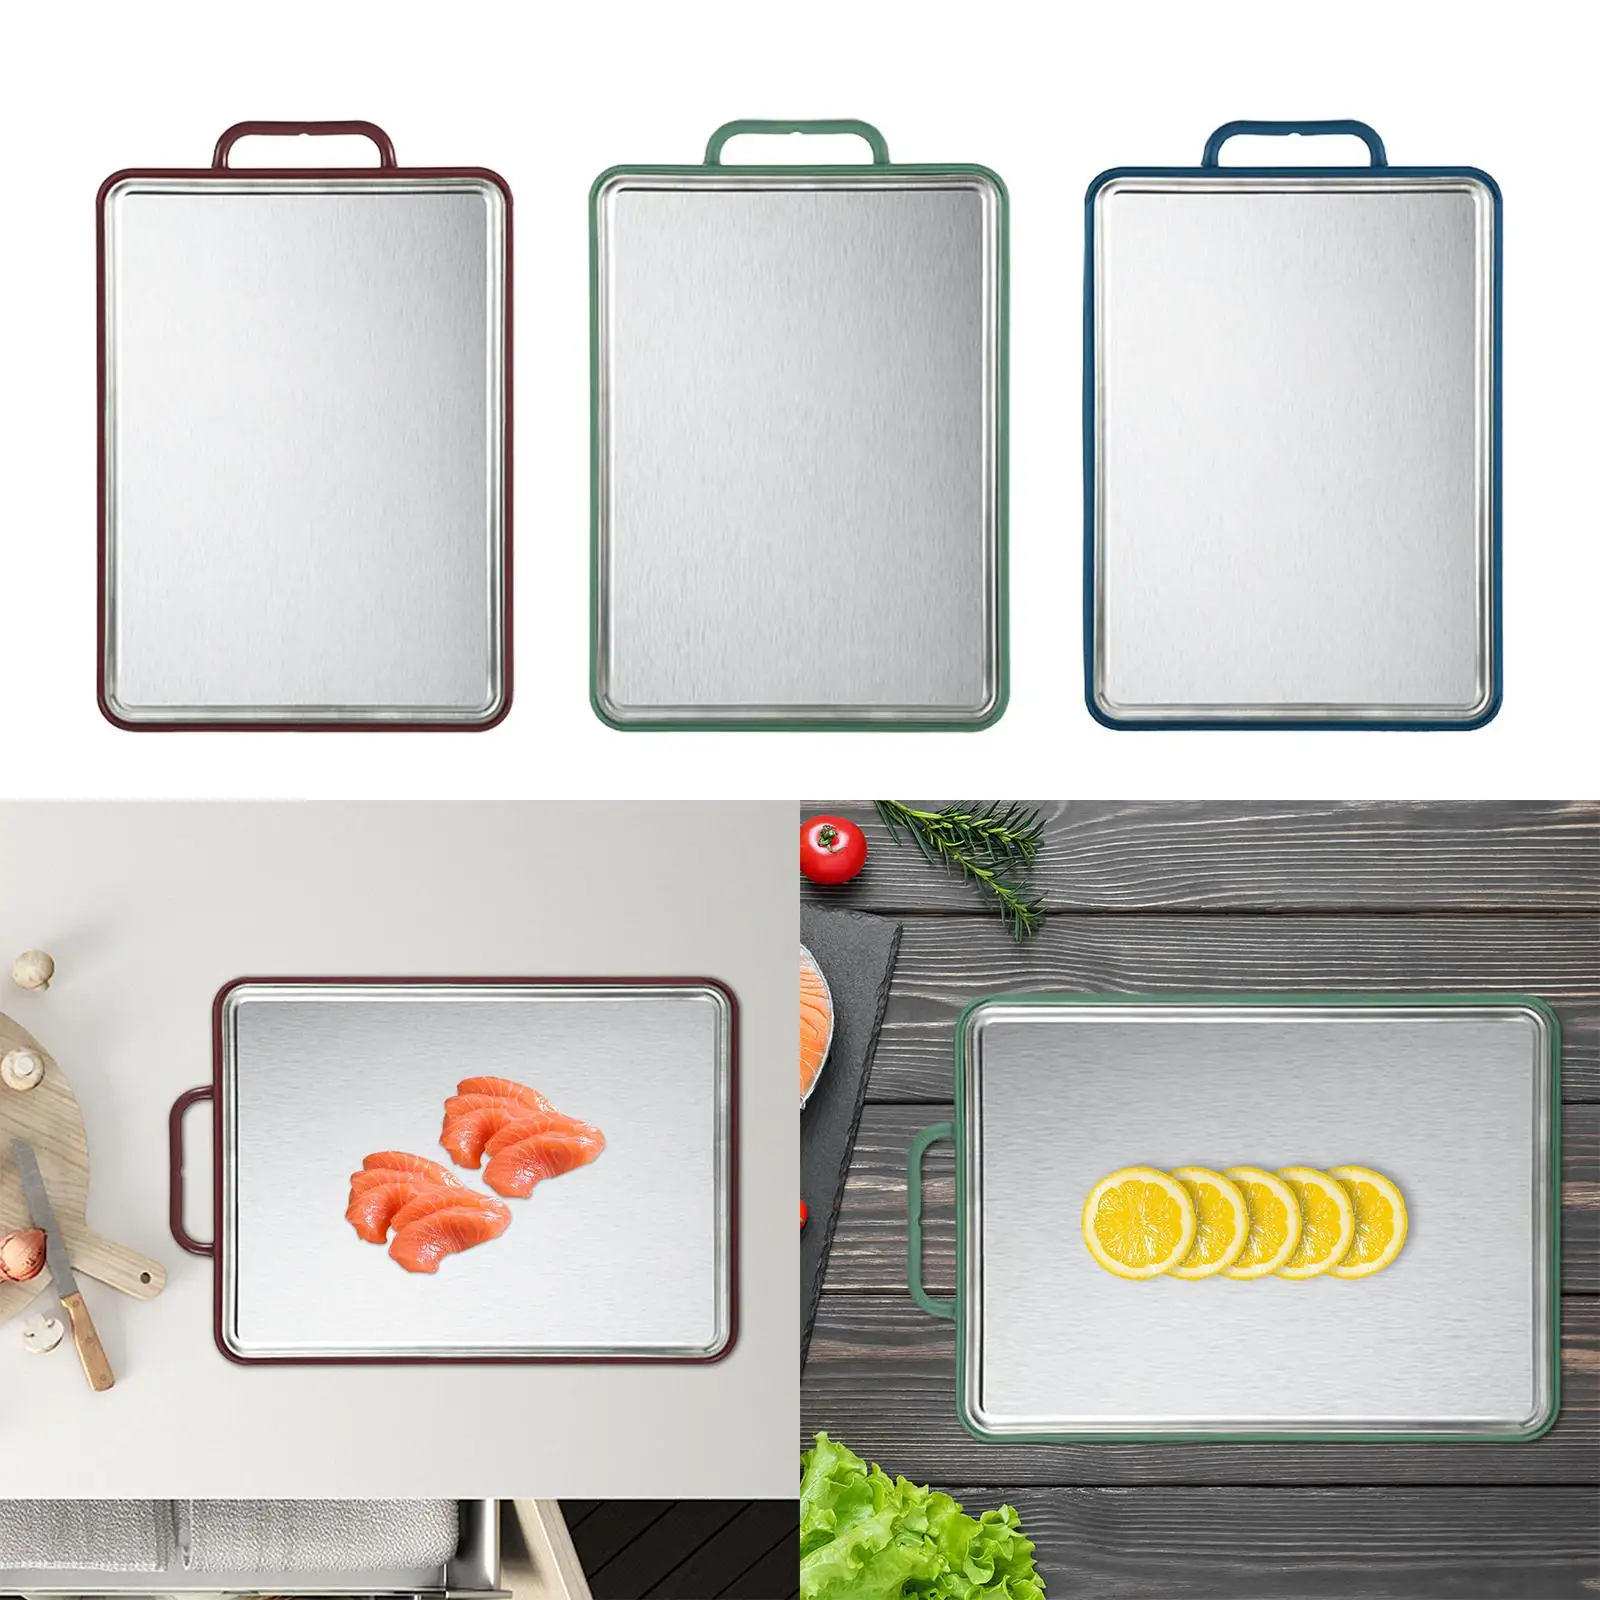 Double Sided Cutting Board Chopping Board Convenient Cleaning Food Grade Material Multifunctional 40x27cm Kitchen Gadget Durable